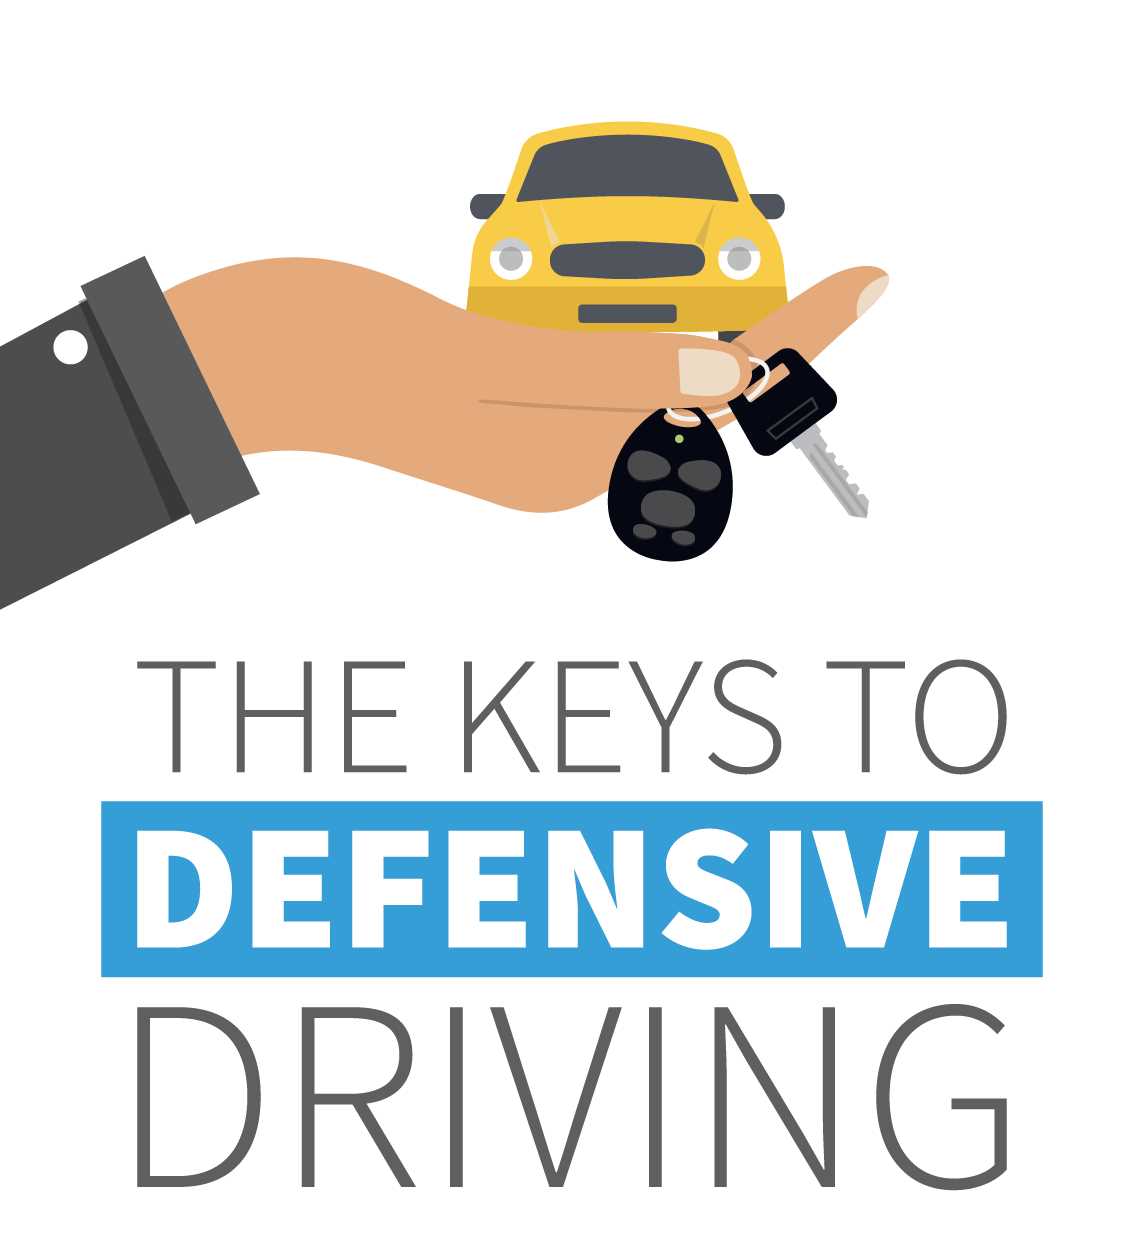 Why Take a Texas Defensive Driving Course?